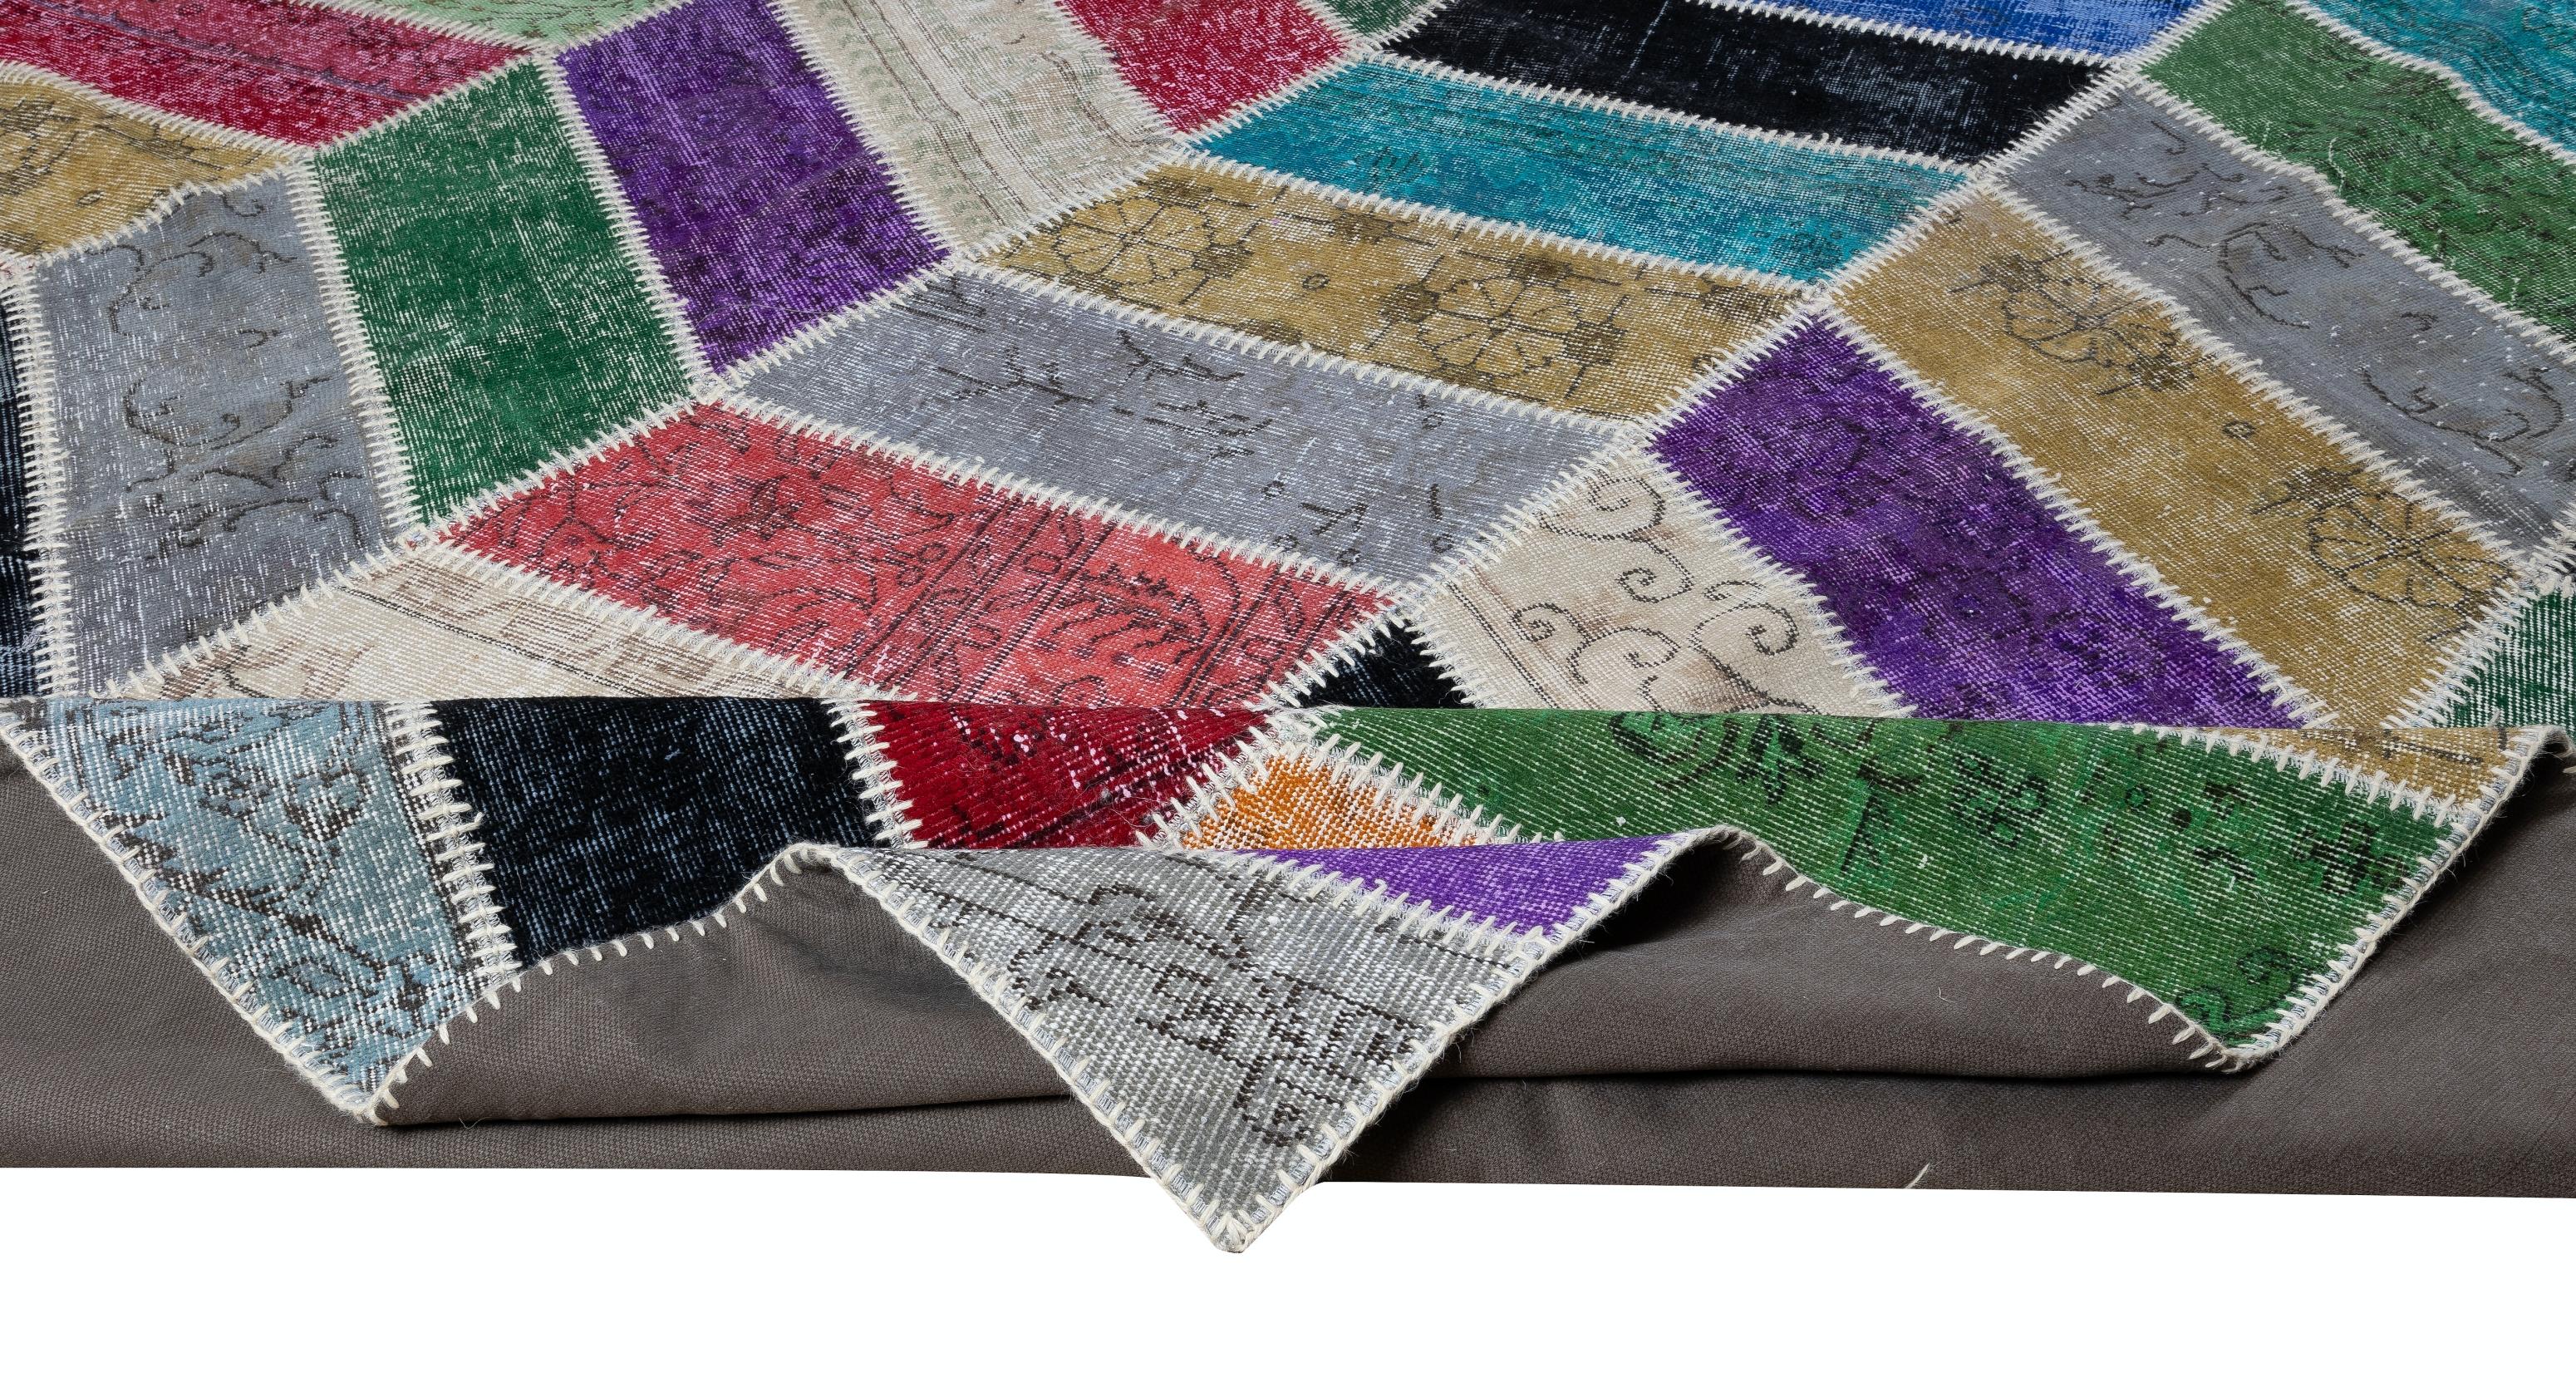 Assorted pieces of vintage hand-knotted Turkish carpets were washed, sheared, re-dyed in various colors, cut into geometric shapes then stitched together by hand to create this beautiful one of a kind patchwork rug. 
A durable dark color cotton